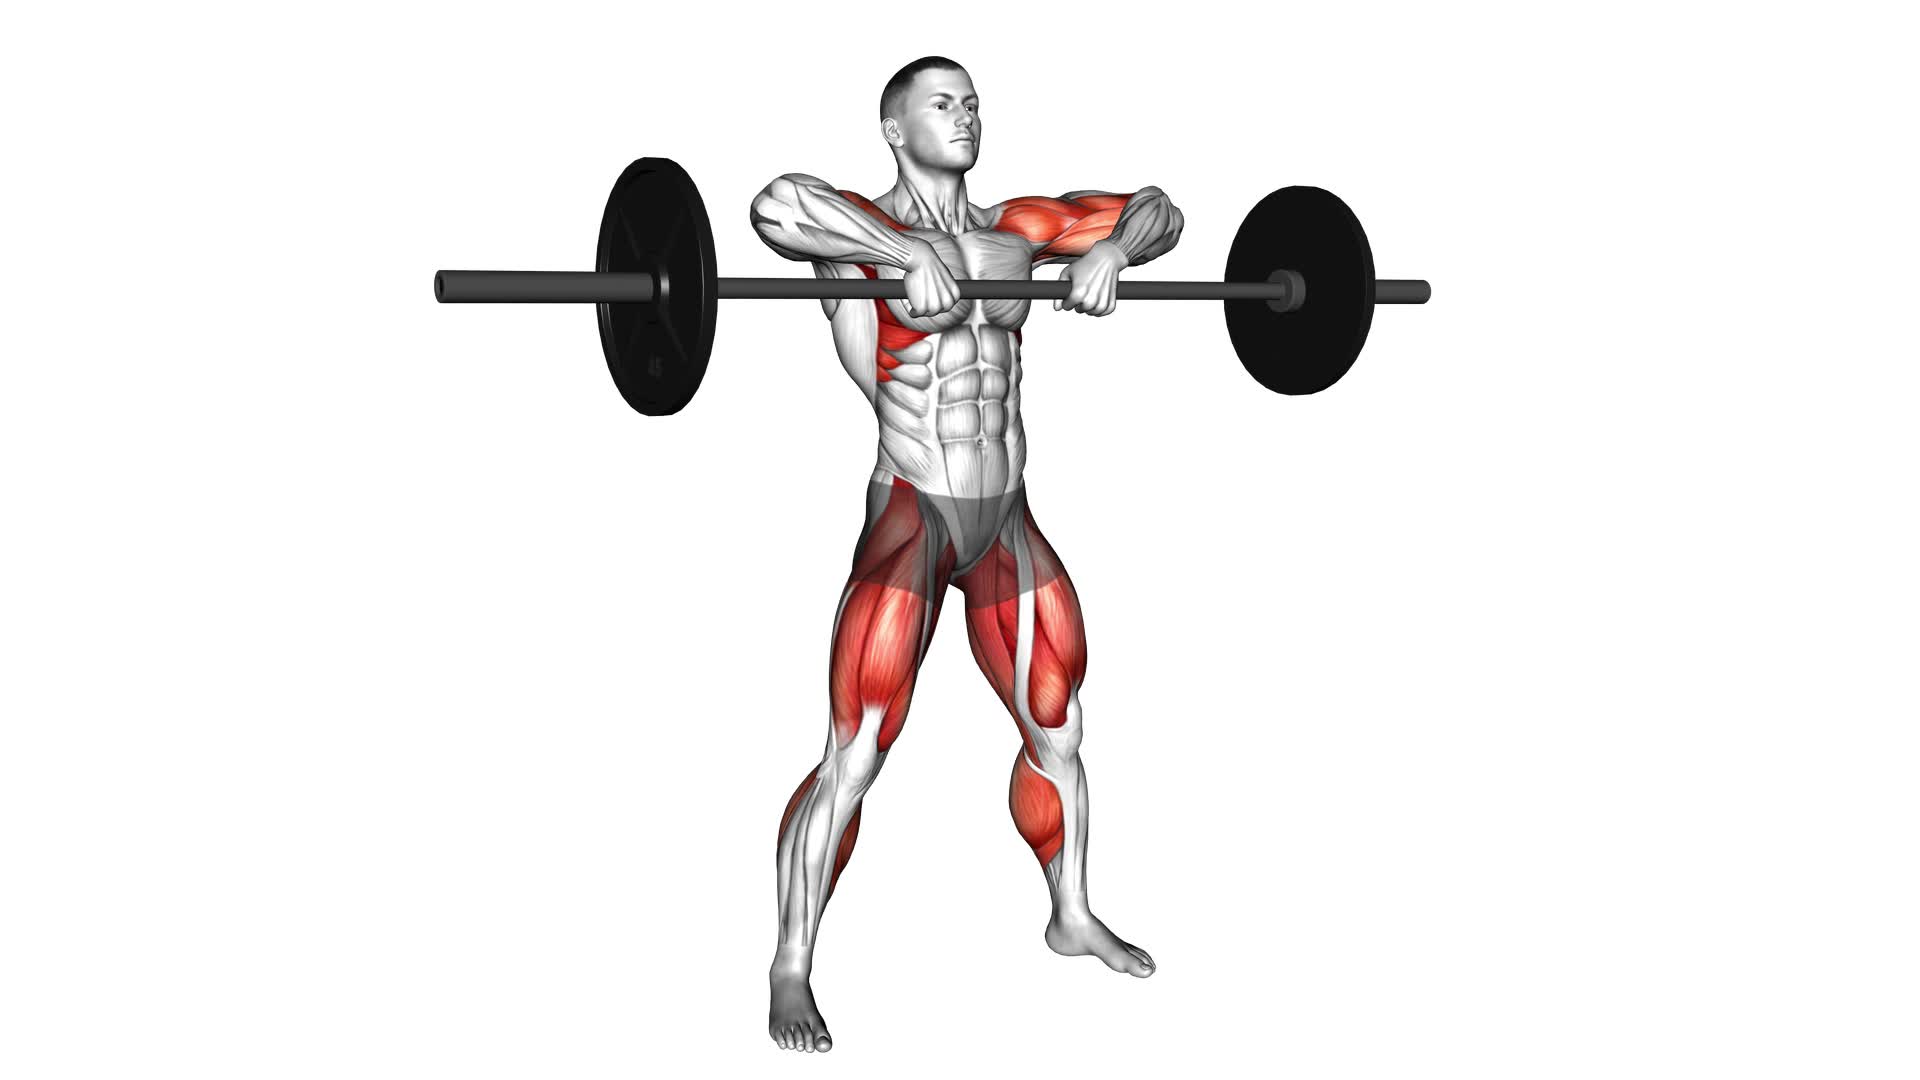 Sumo Deadlift High Pull - Video Exercise Guide & Tips